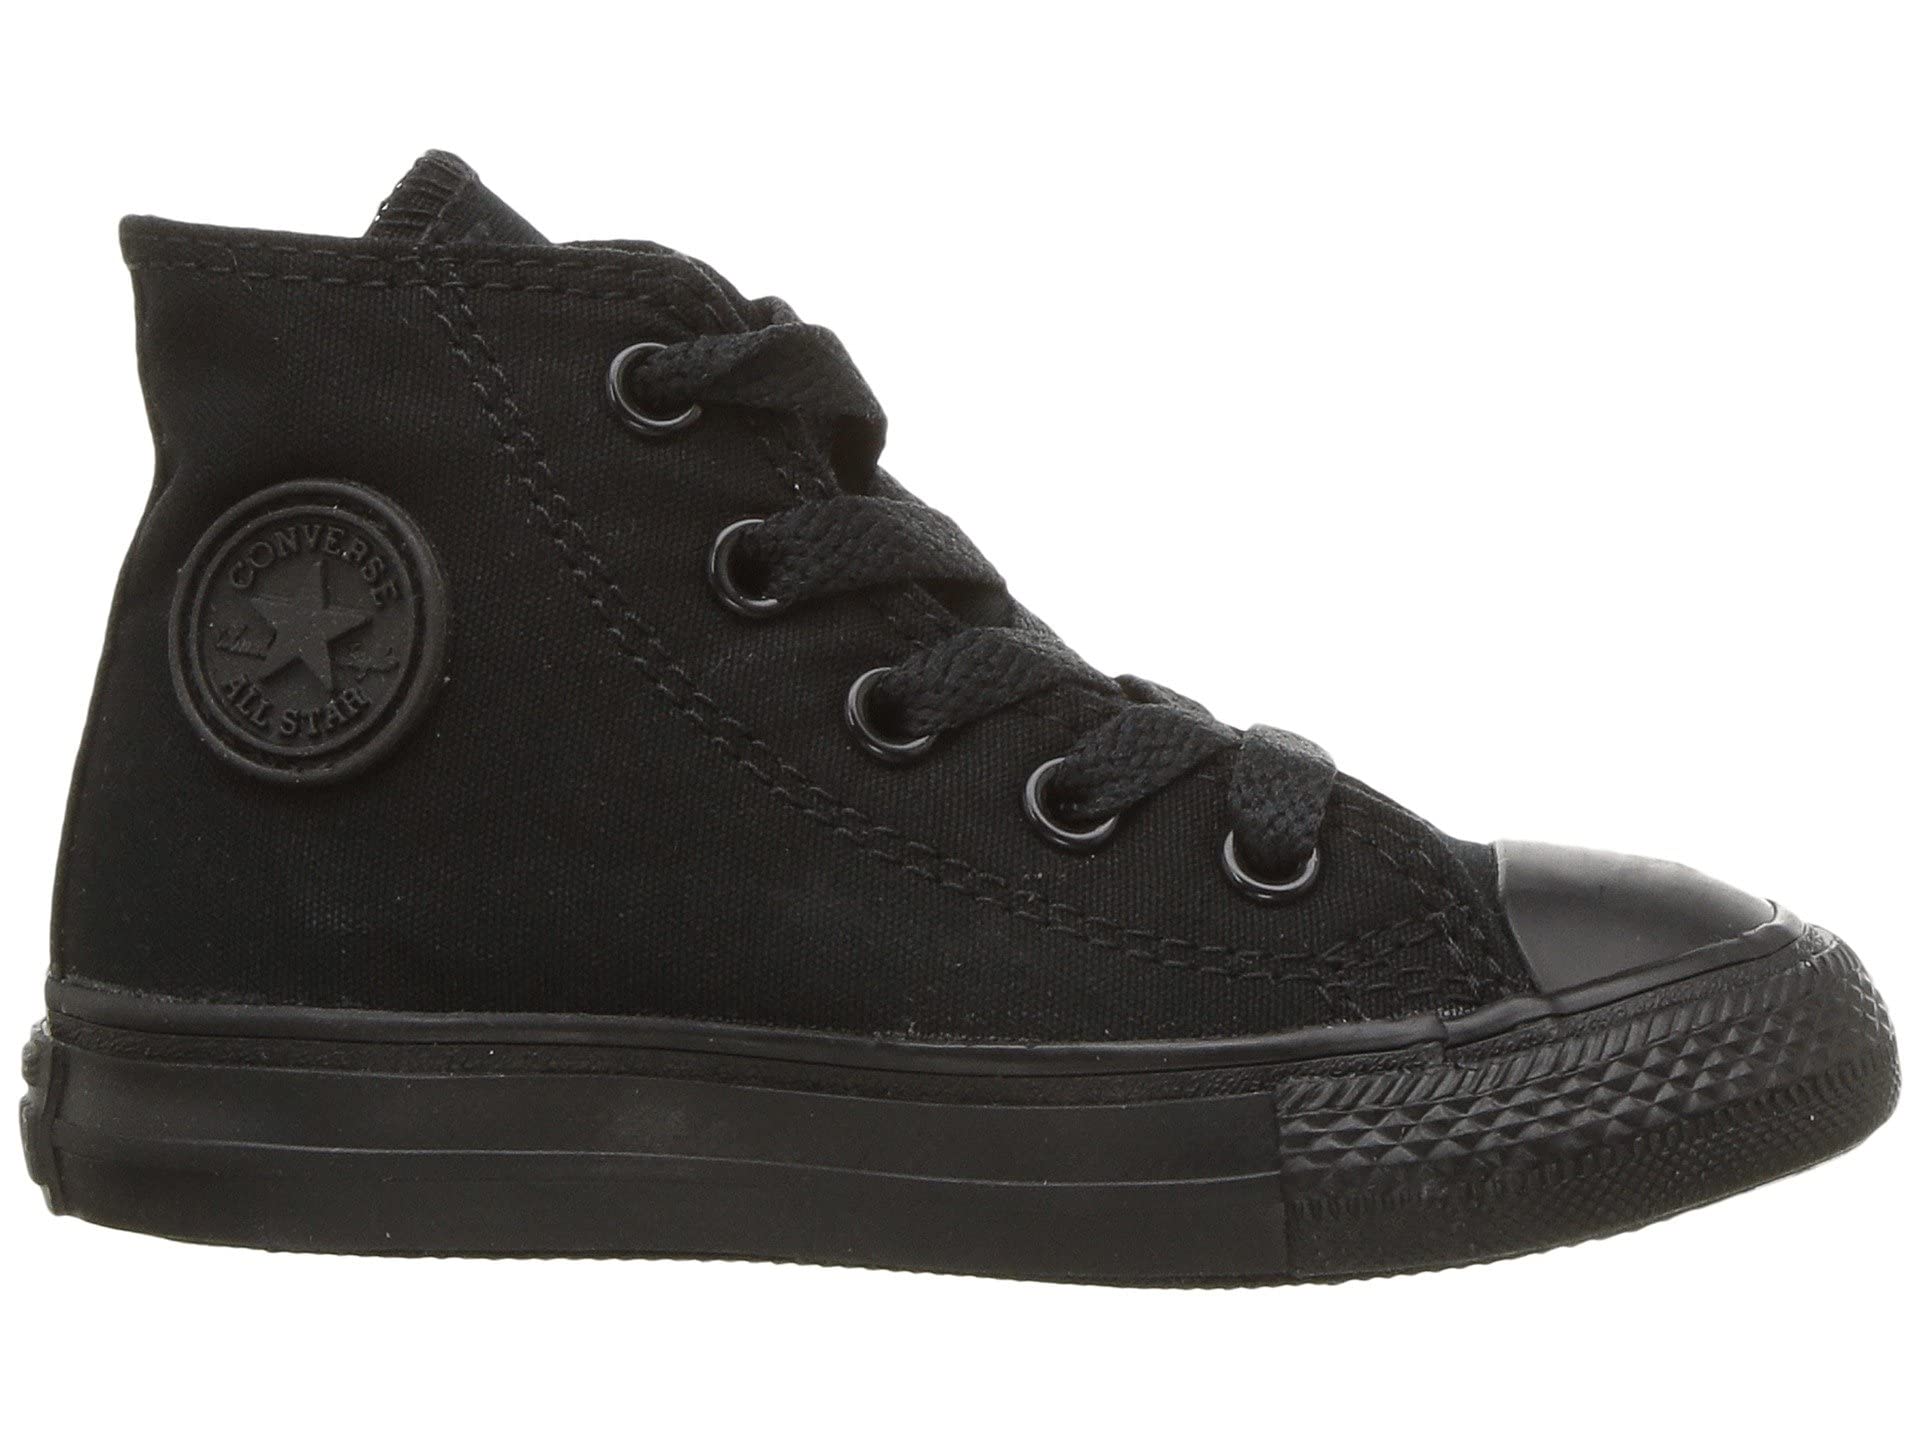 Converse Baby Chuck Taylor All Star Canvas High Top Sneaker, Black Monochrome, 2 M US Infant